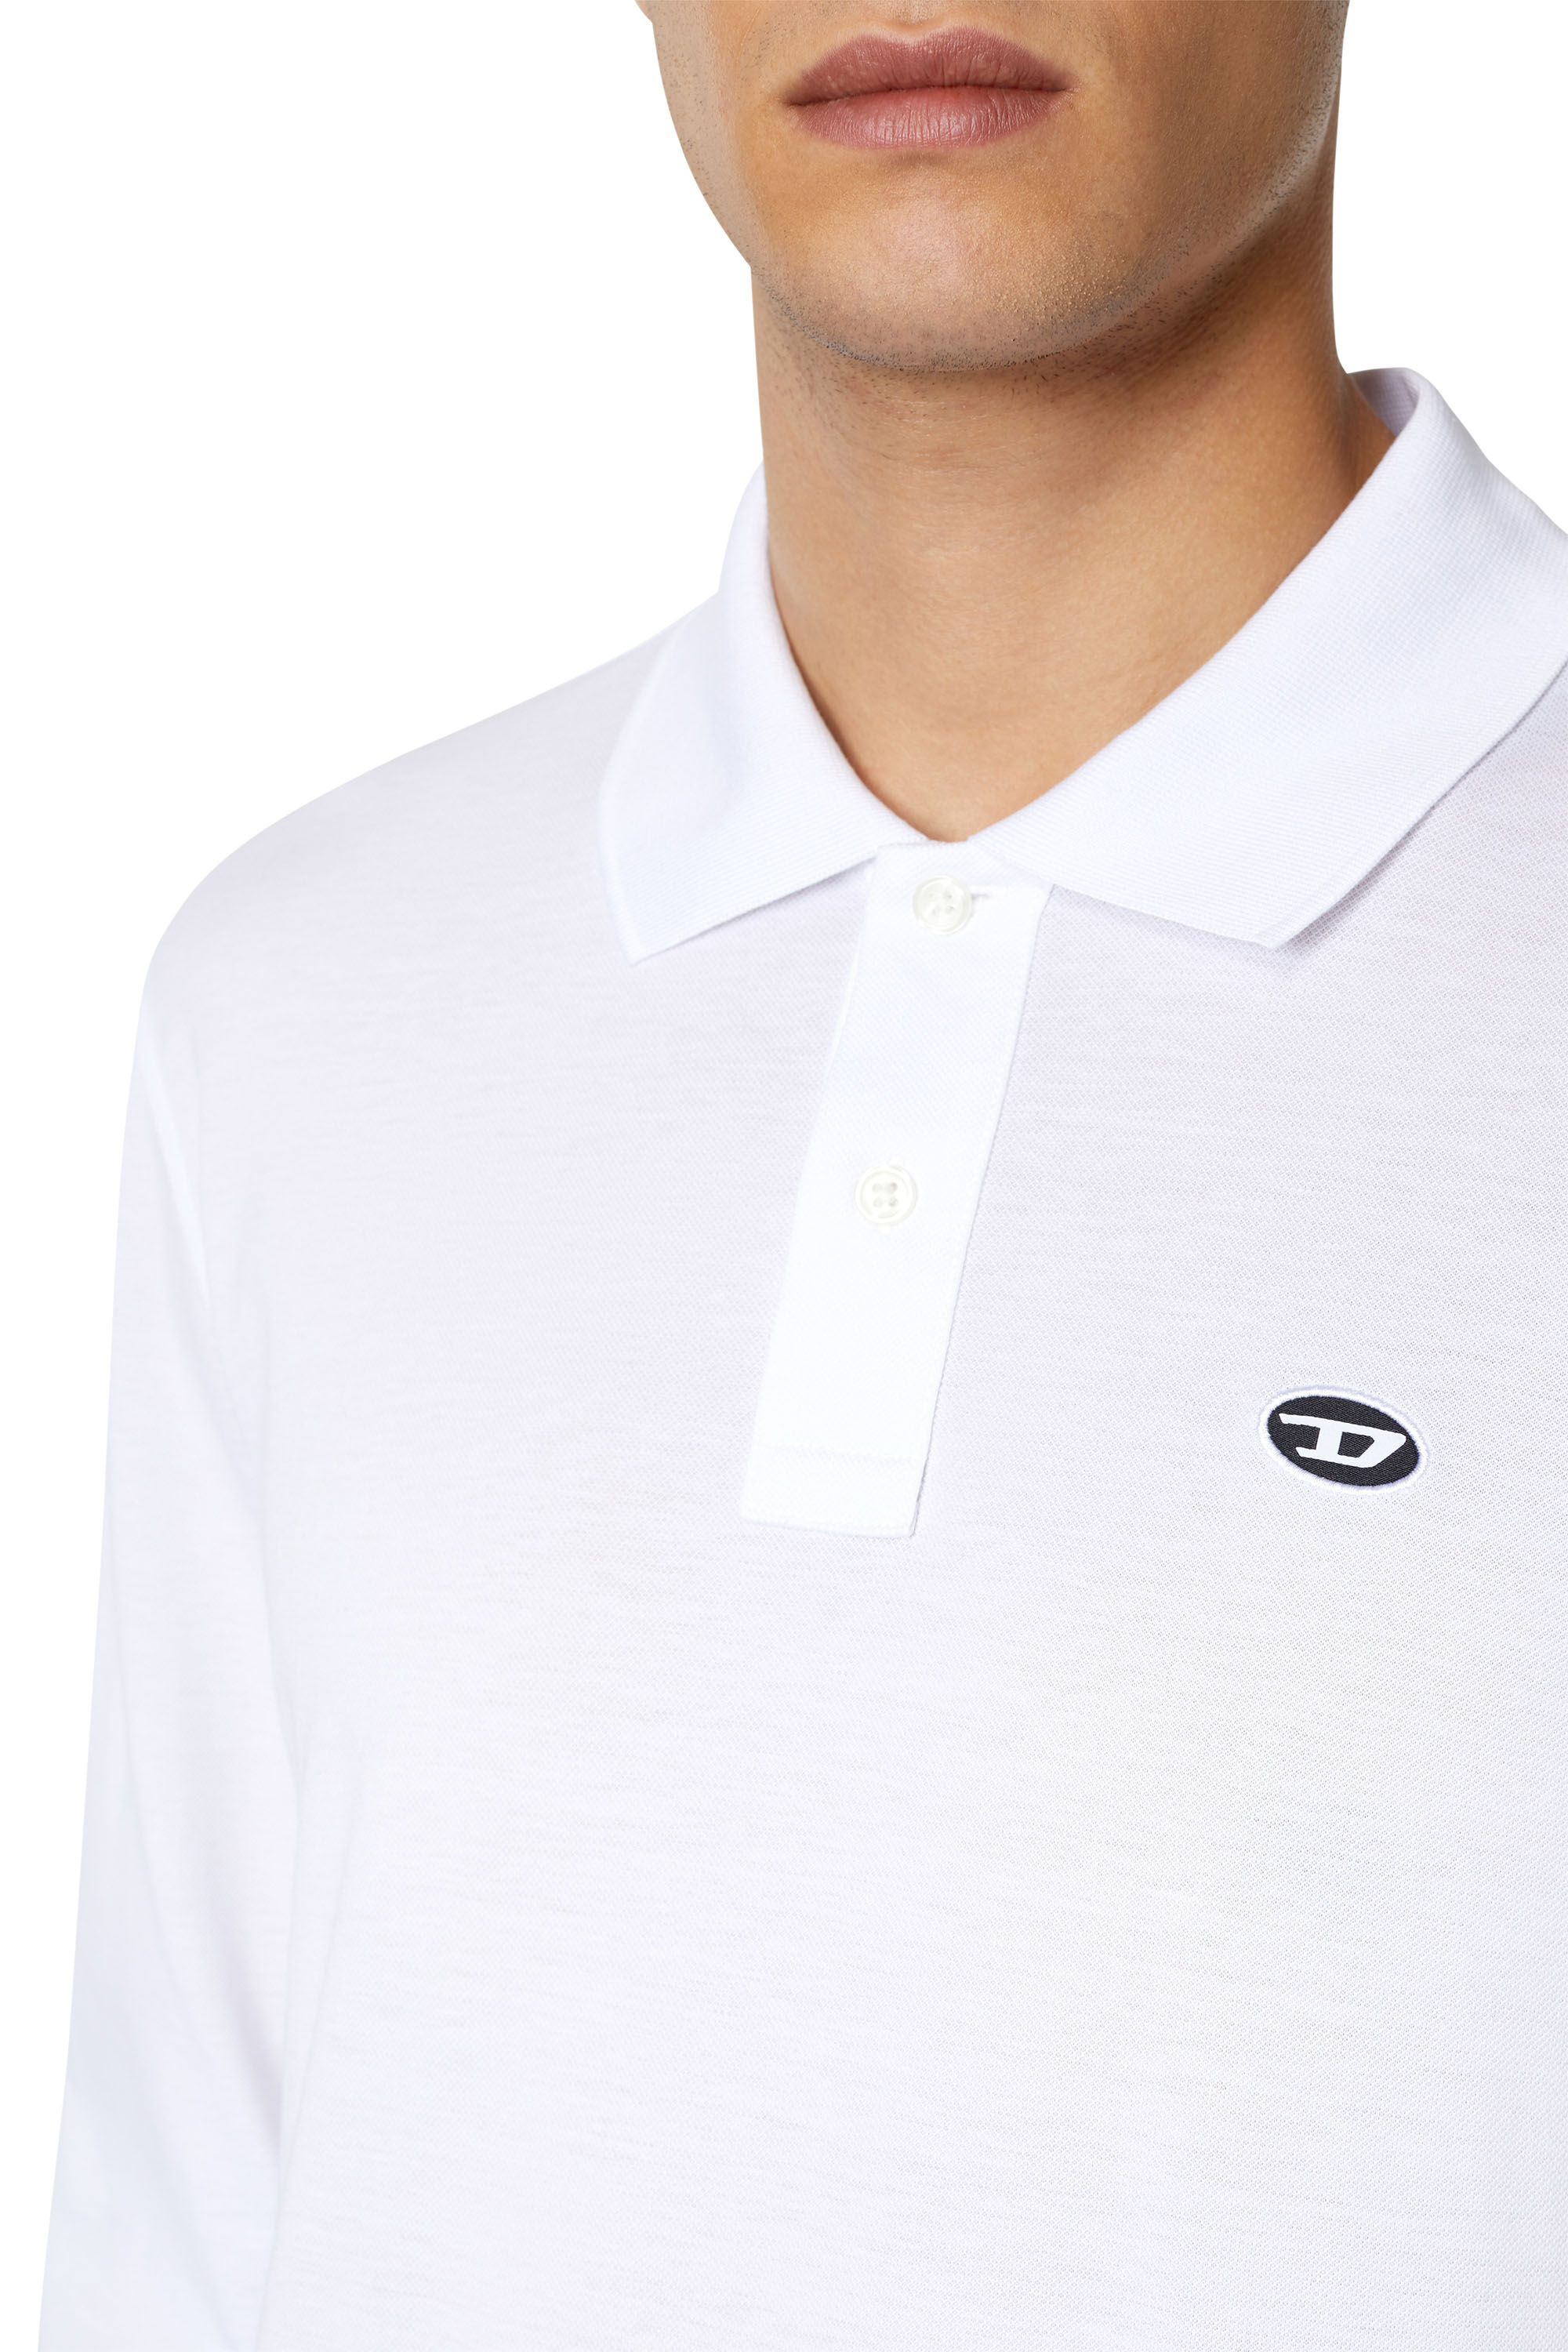 T-SMITH-LS-DOVAL-PJ Man: Long-sleeve polo shirt | Diesel